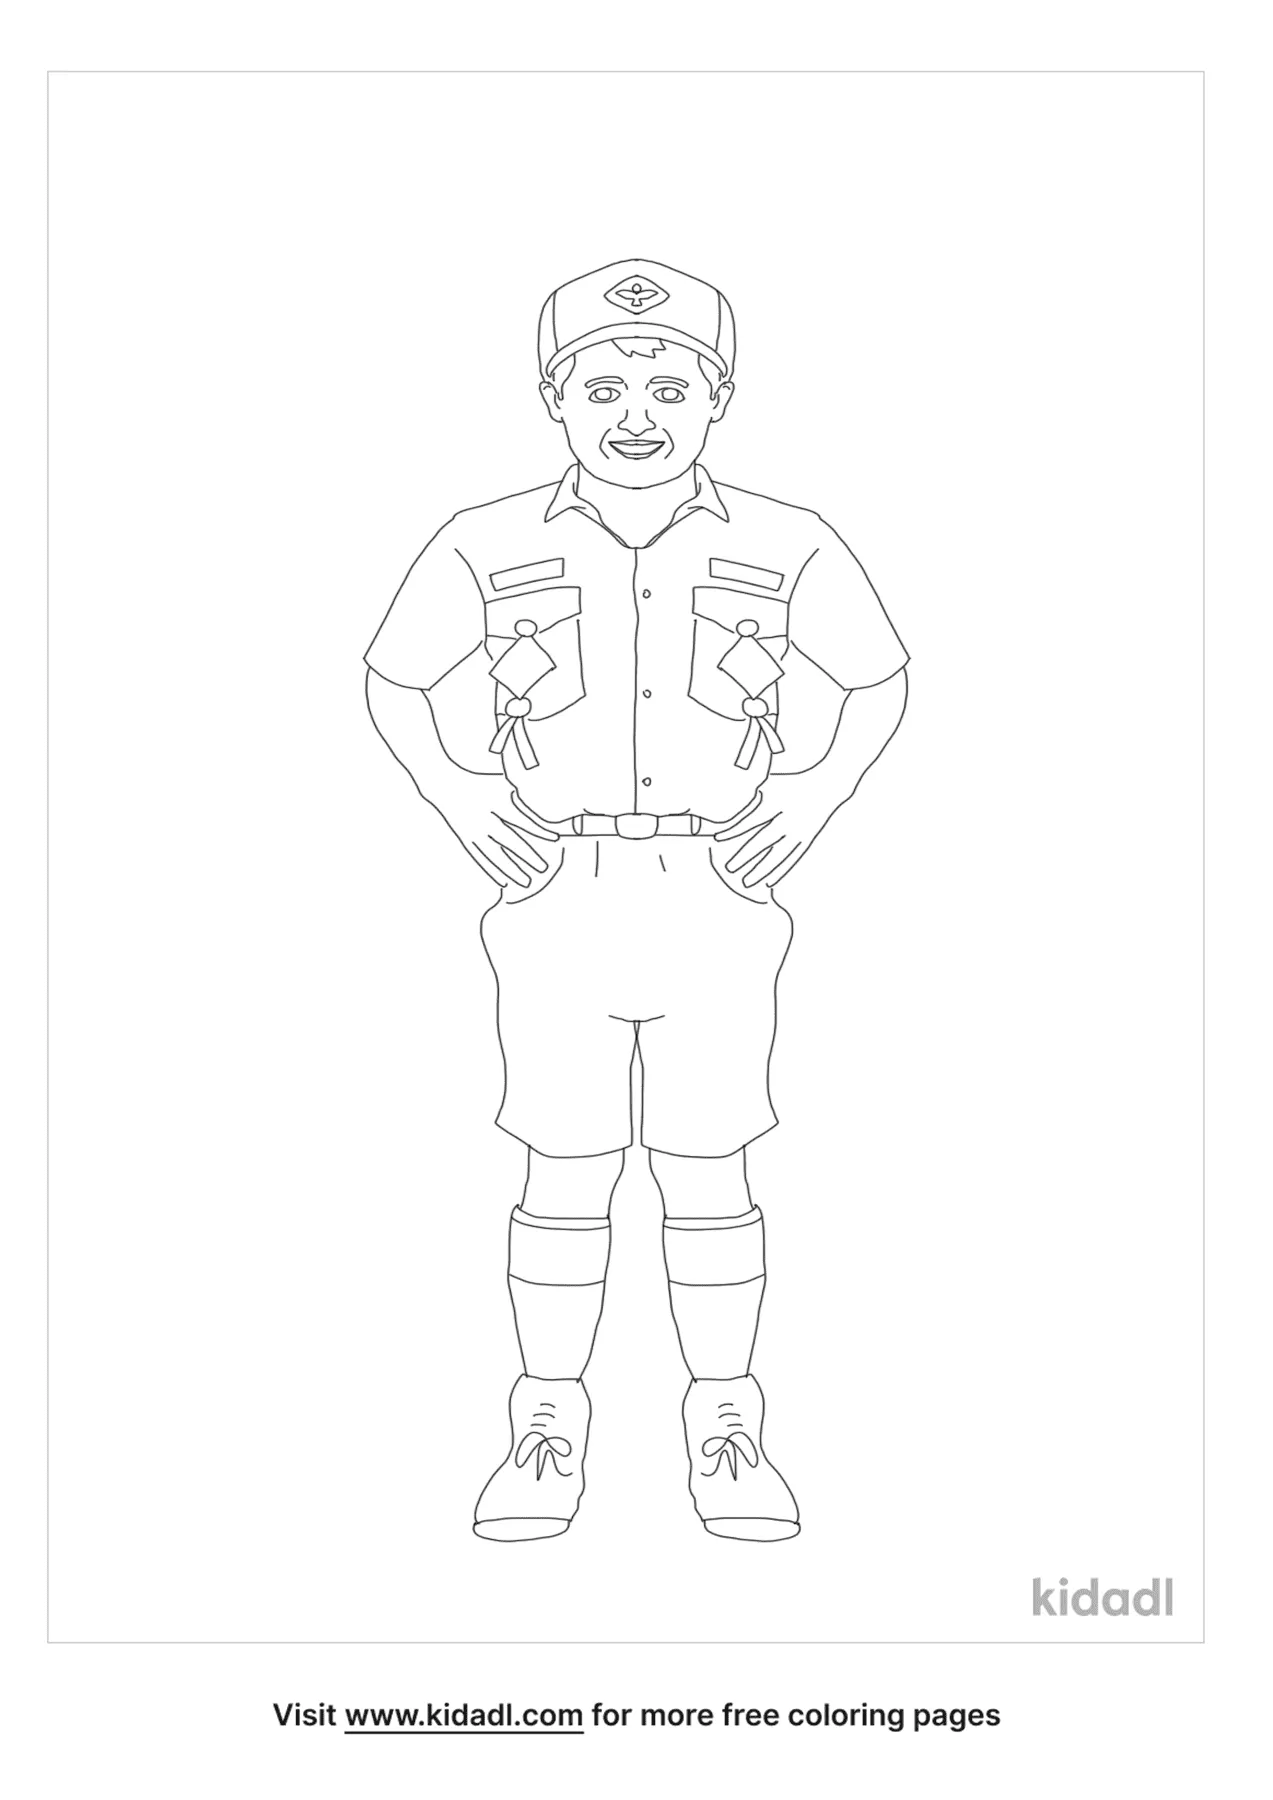 cubscout coloring pages